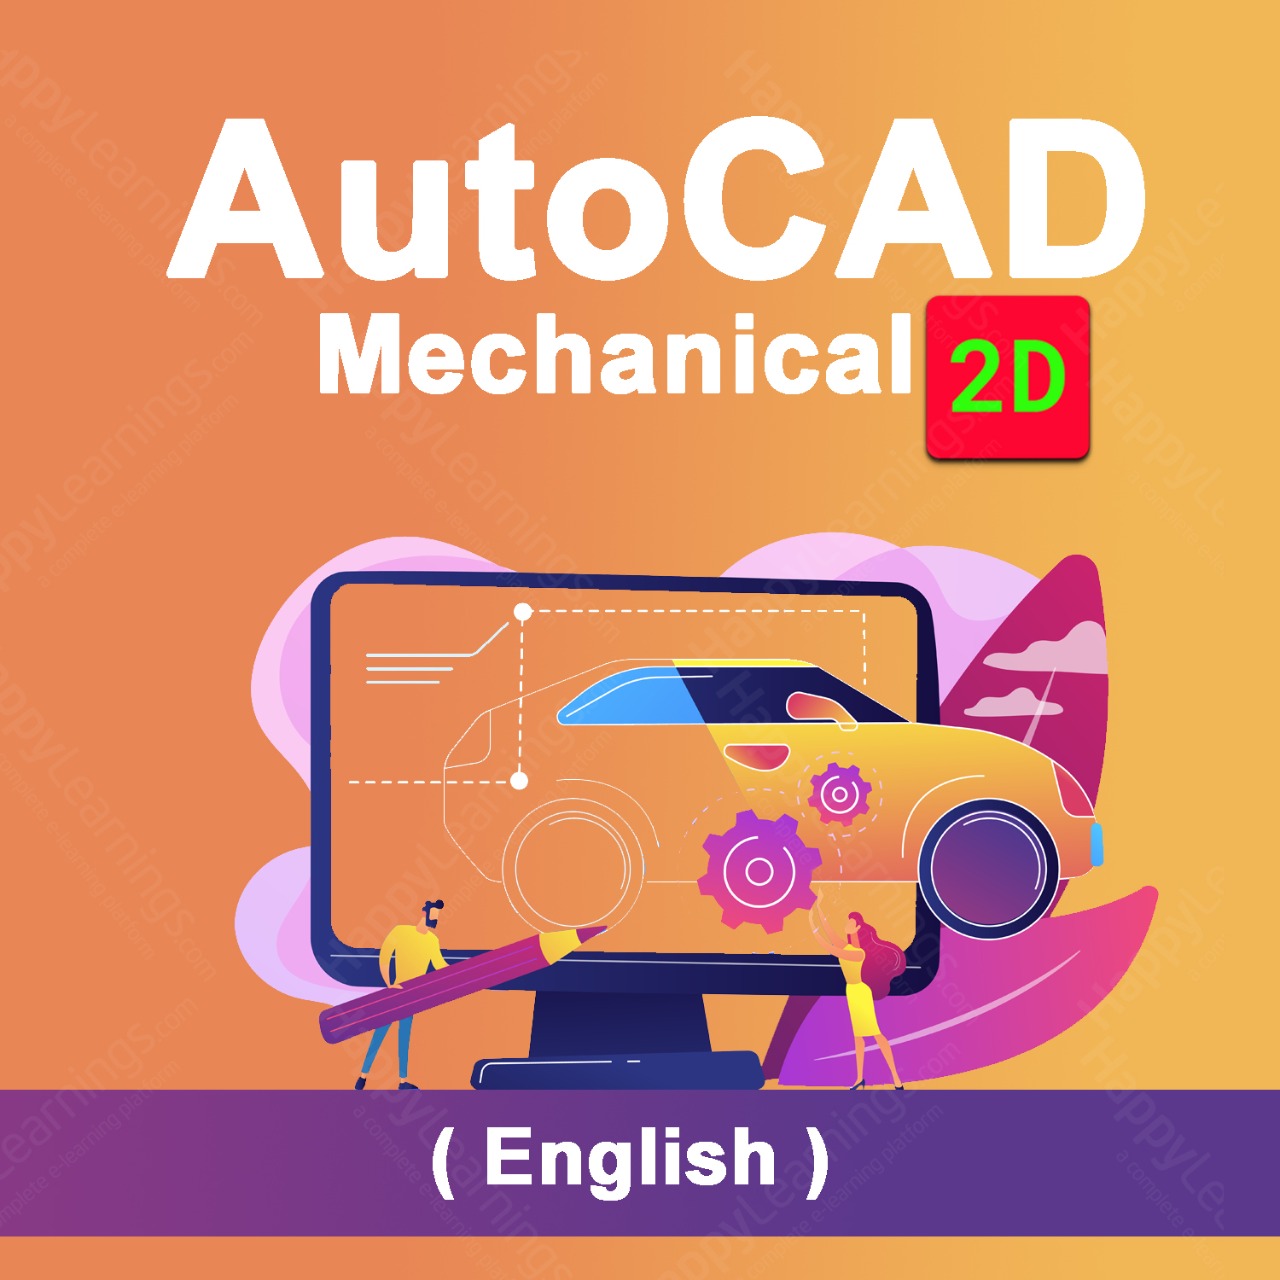 AutoCAD Mechanical 2D in English